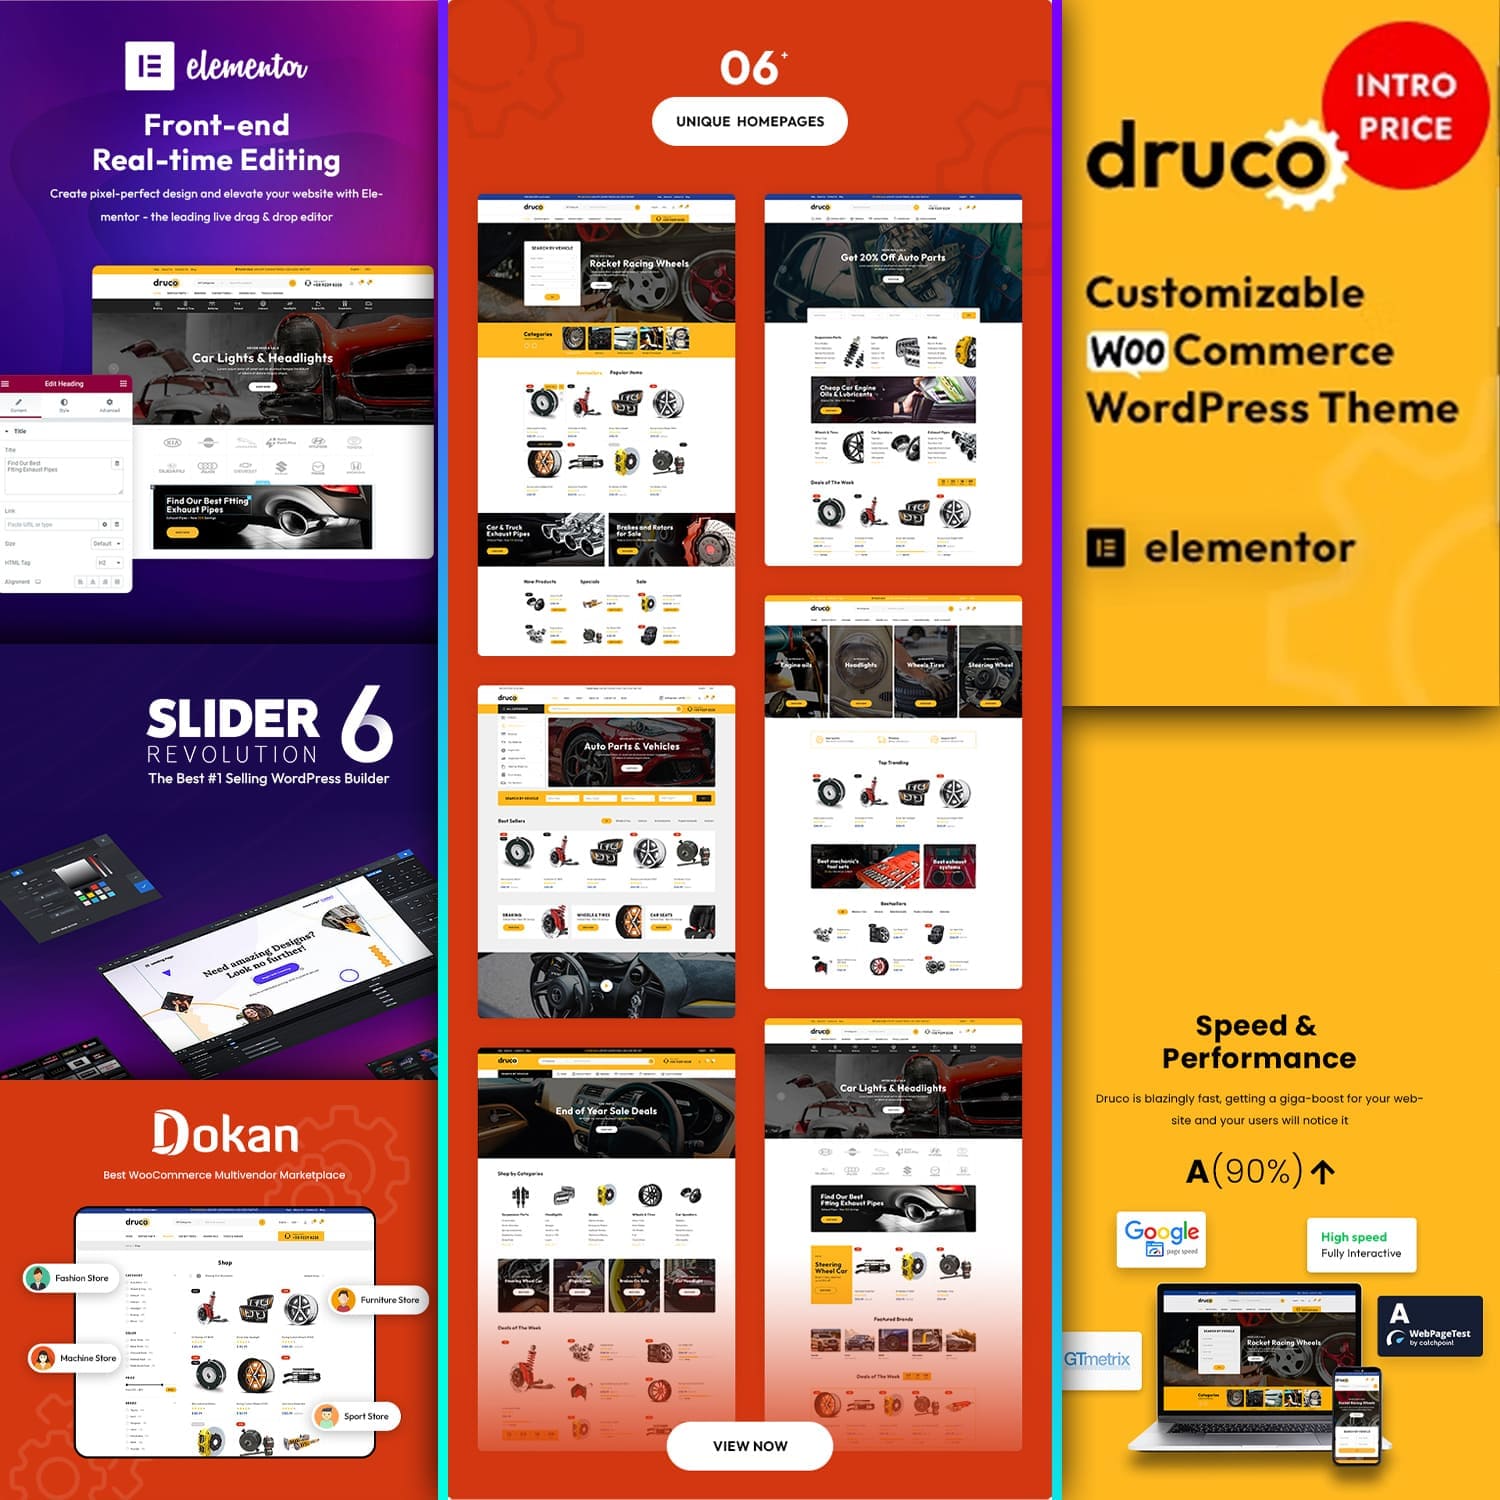 Unique homepages of Druco - Elementor WooCommerce WordPress Theme.